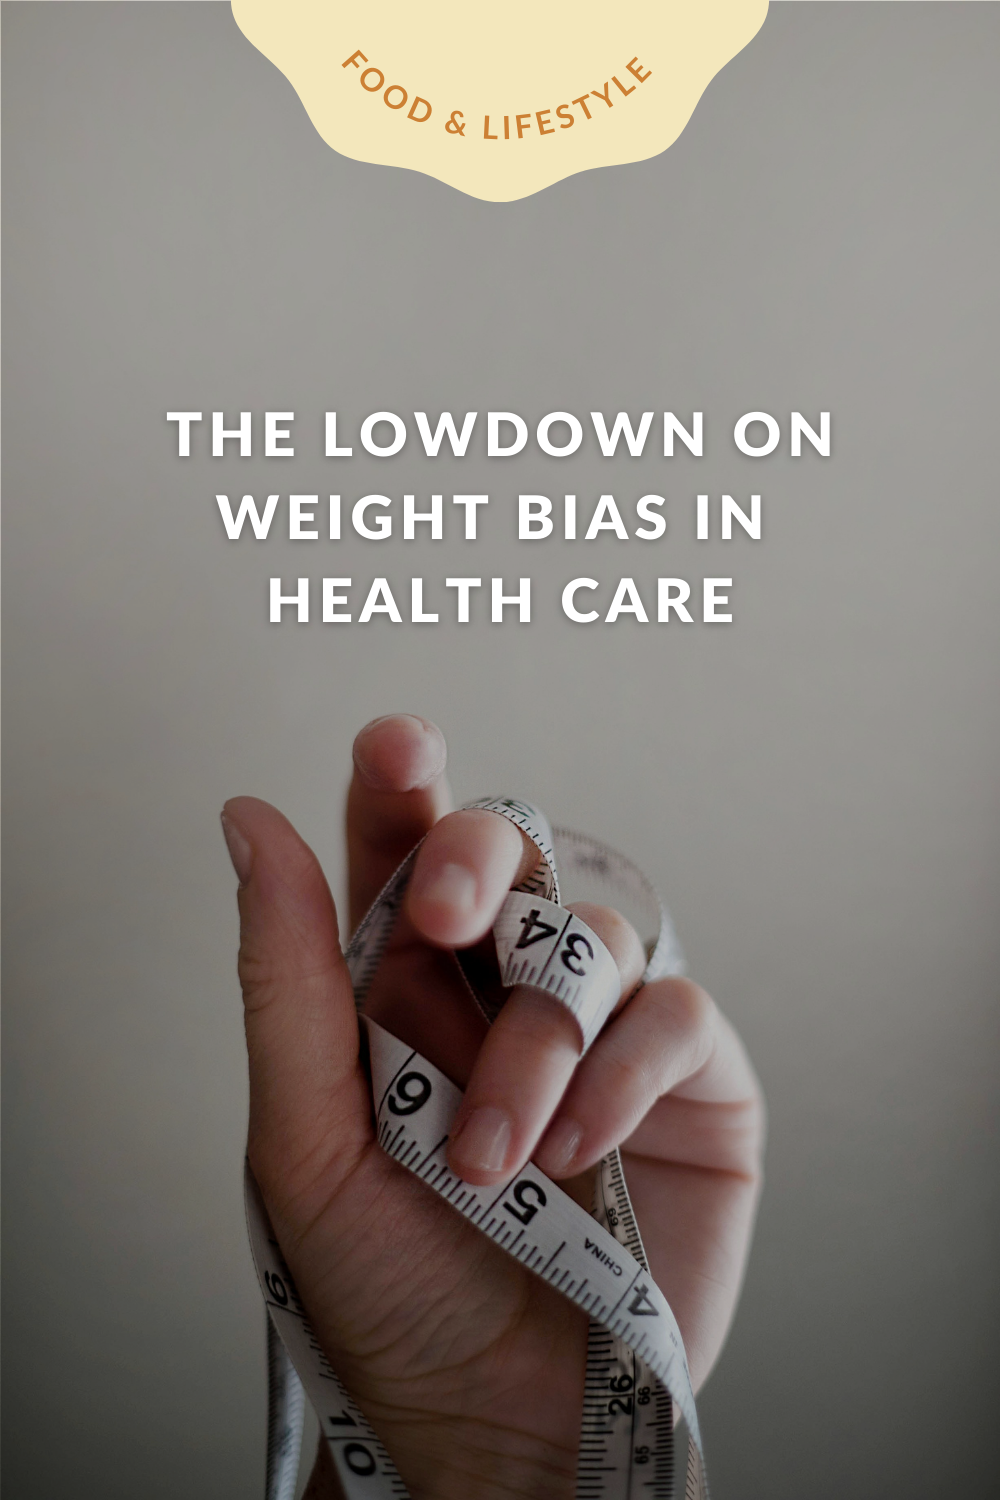 The Lowdown on Weight Bias in Health Care